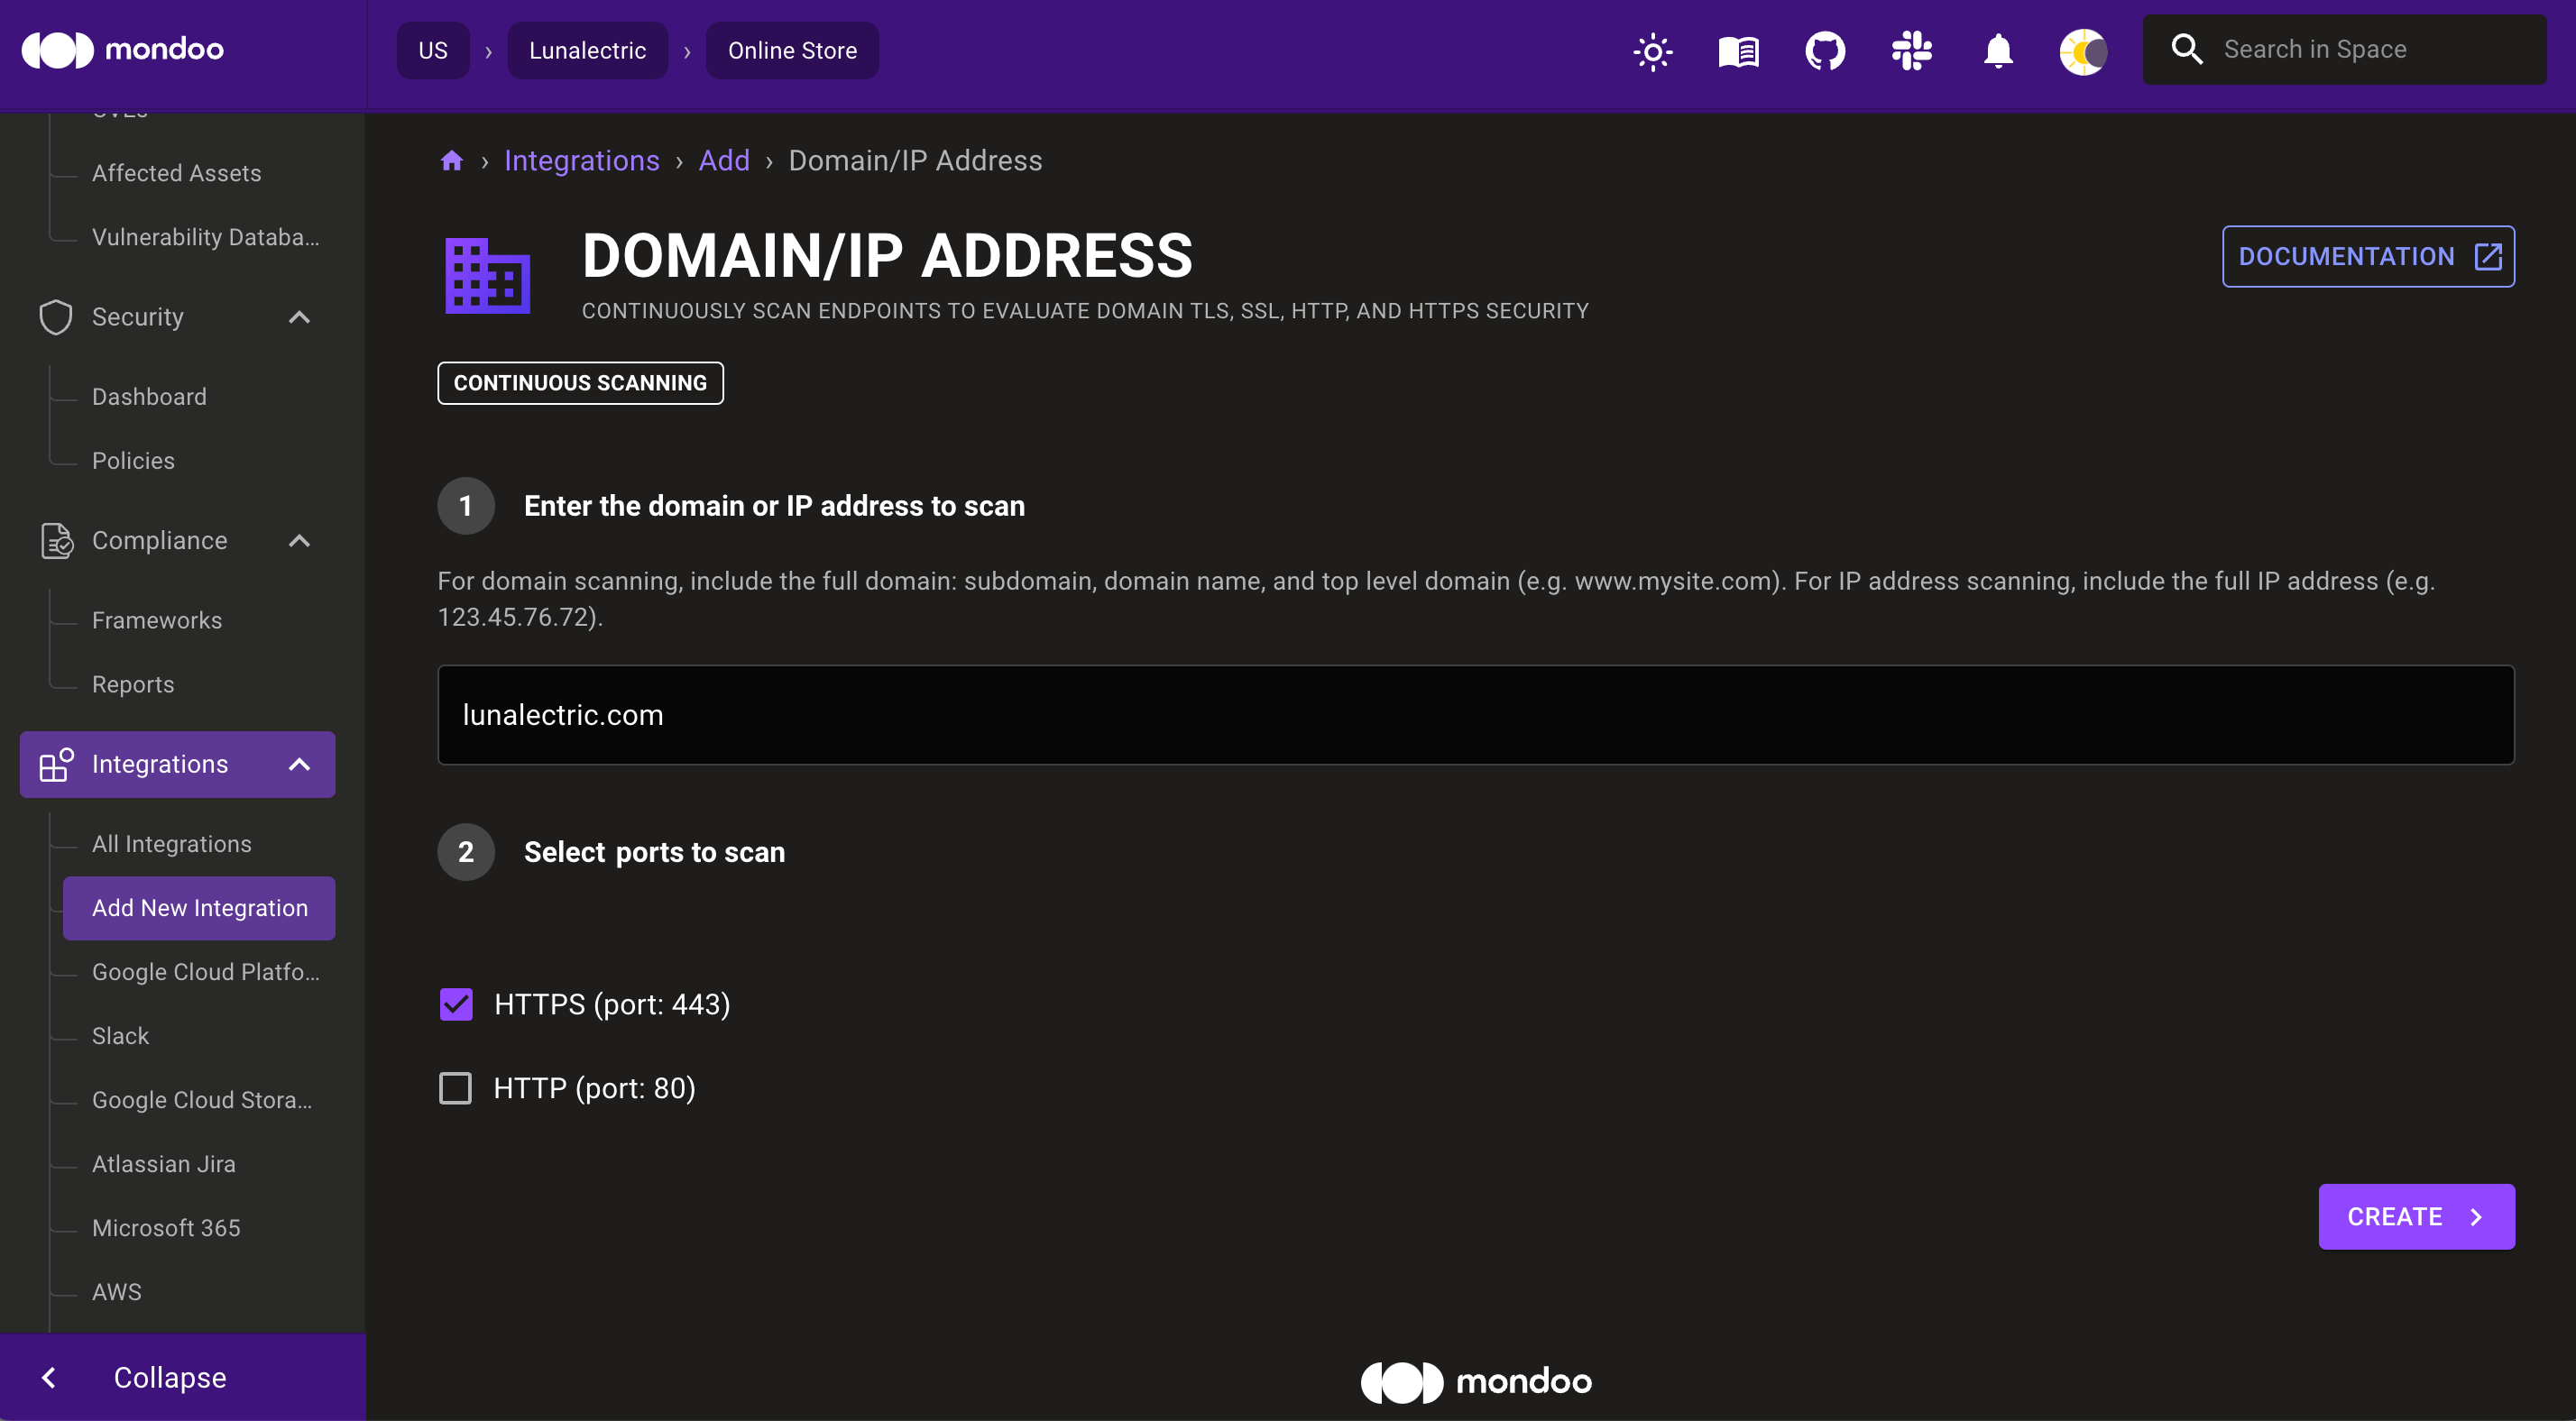 Continuously scan domain or IP address